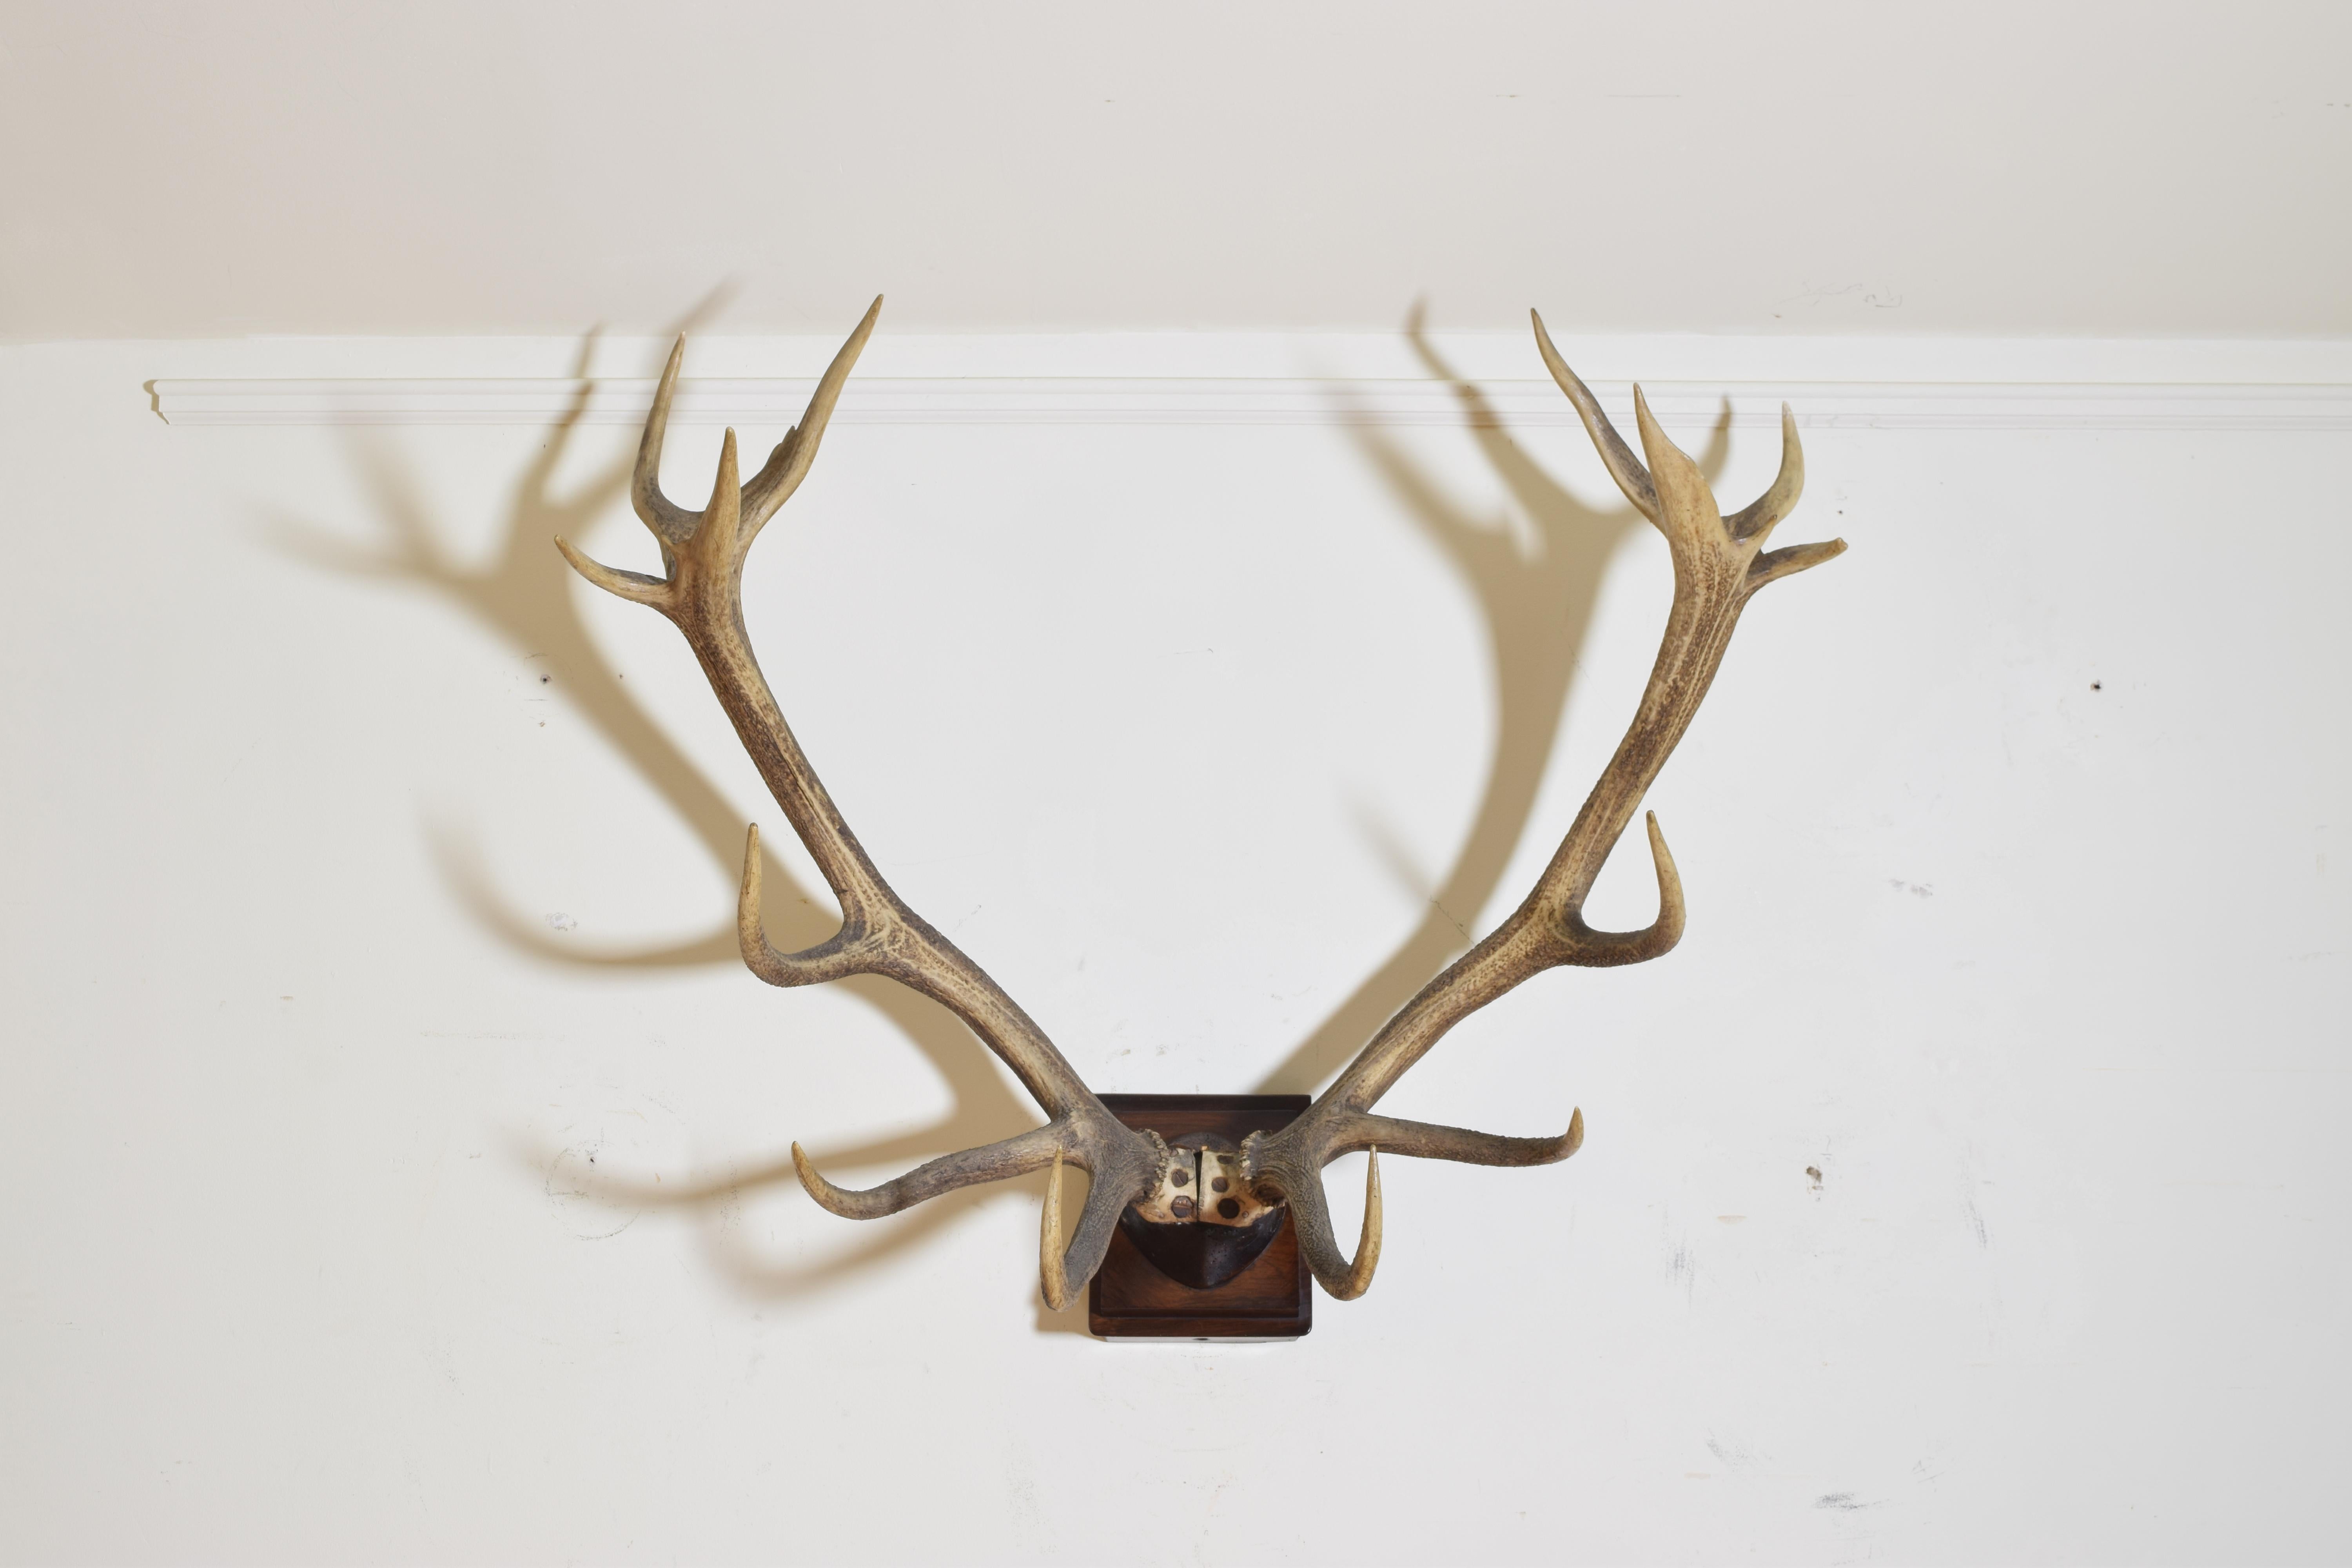 The antlers and partial skull monted on a triangular walnut backplate, triangular to allow the span of the antlers to clear the wall when hung, the red deer (Cervus elaphus) is one of the largest deer species. The red deer inhabits most of Europe,